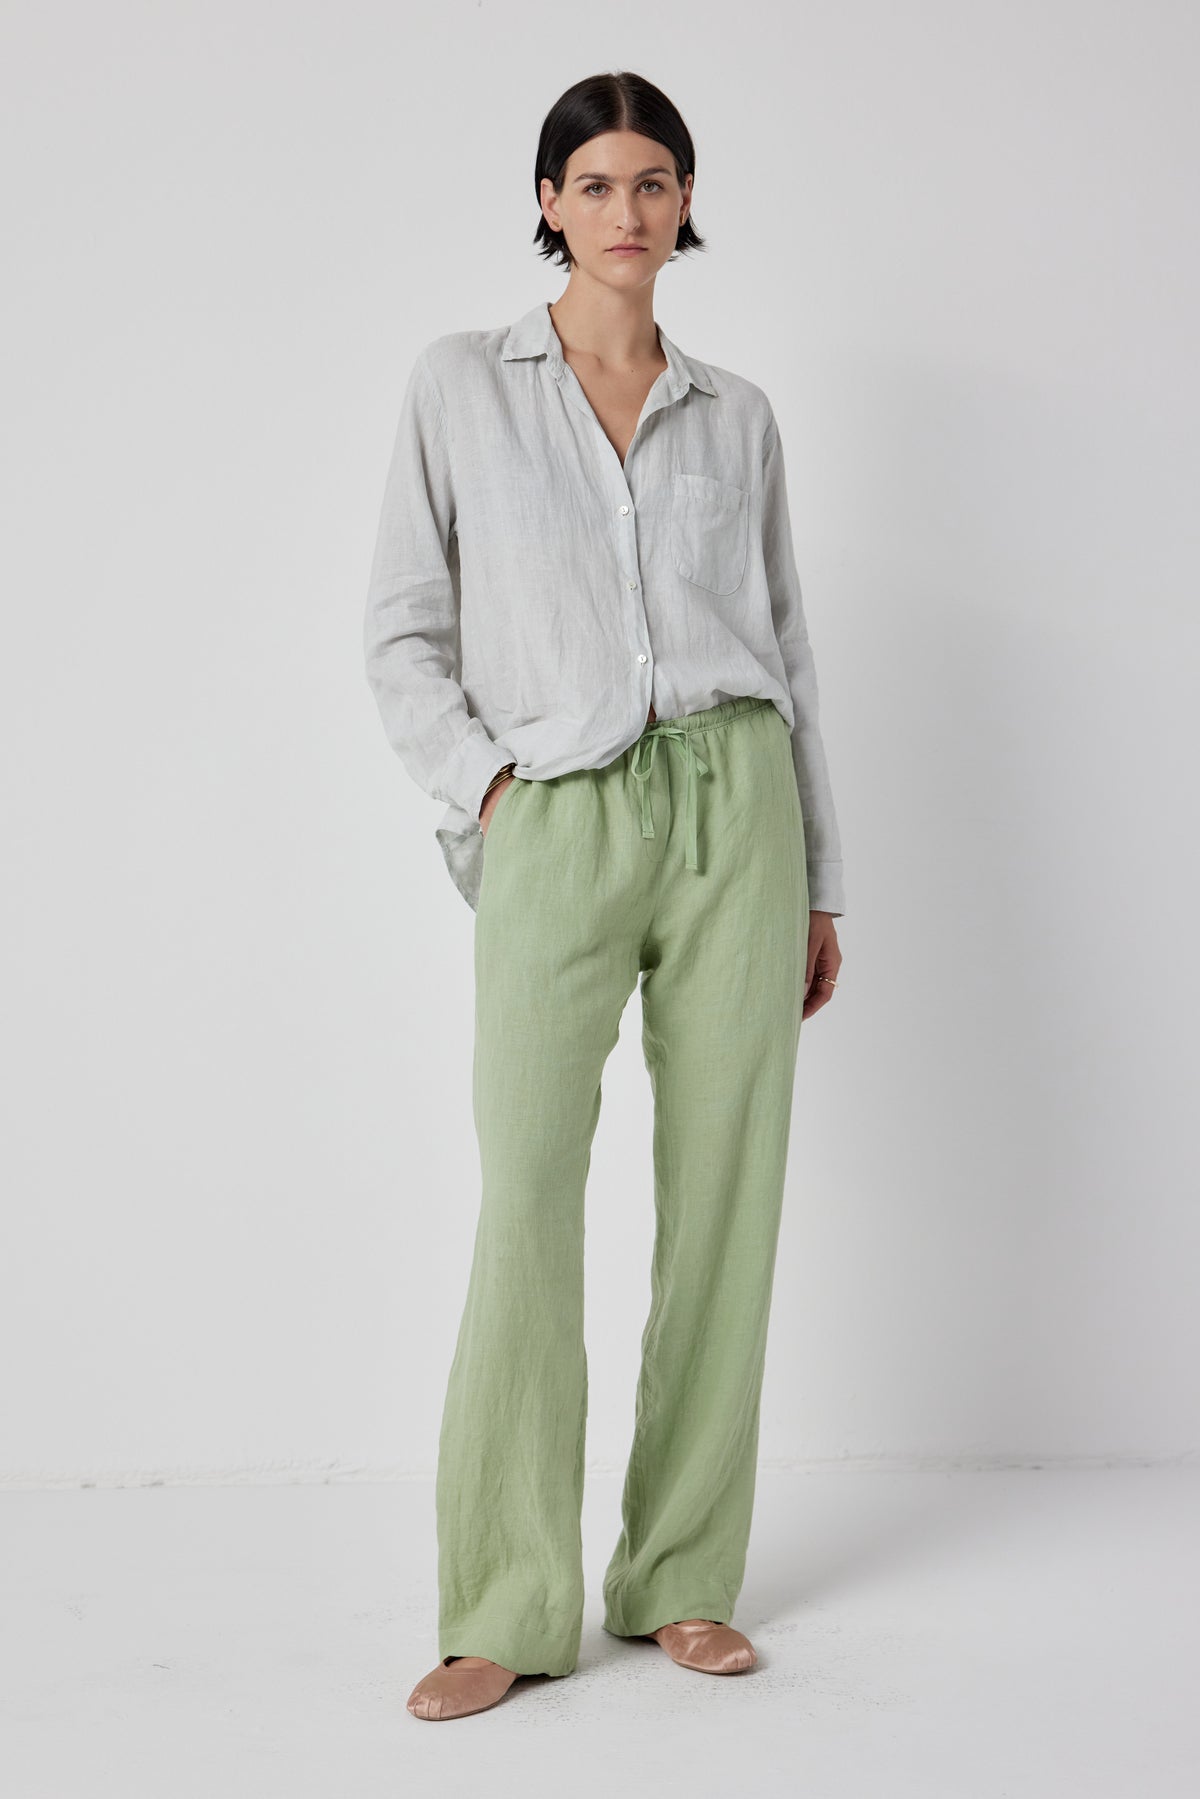 A woman stands in a studio wearing a light gray shirt, Velvet by Jenny Graham PICO LINEN PANT, and tan loafers, with hands partially in pockets, looking directly at the camera.-36219023065281